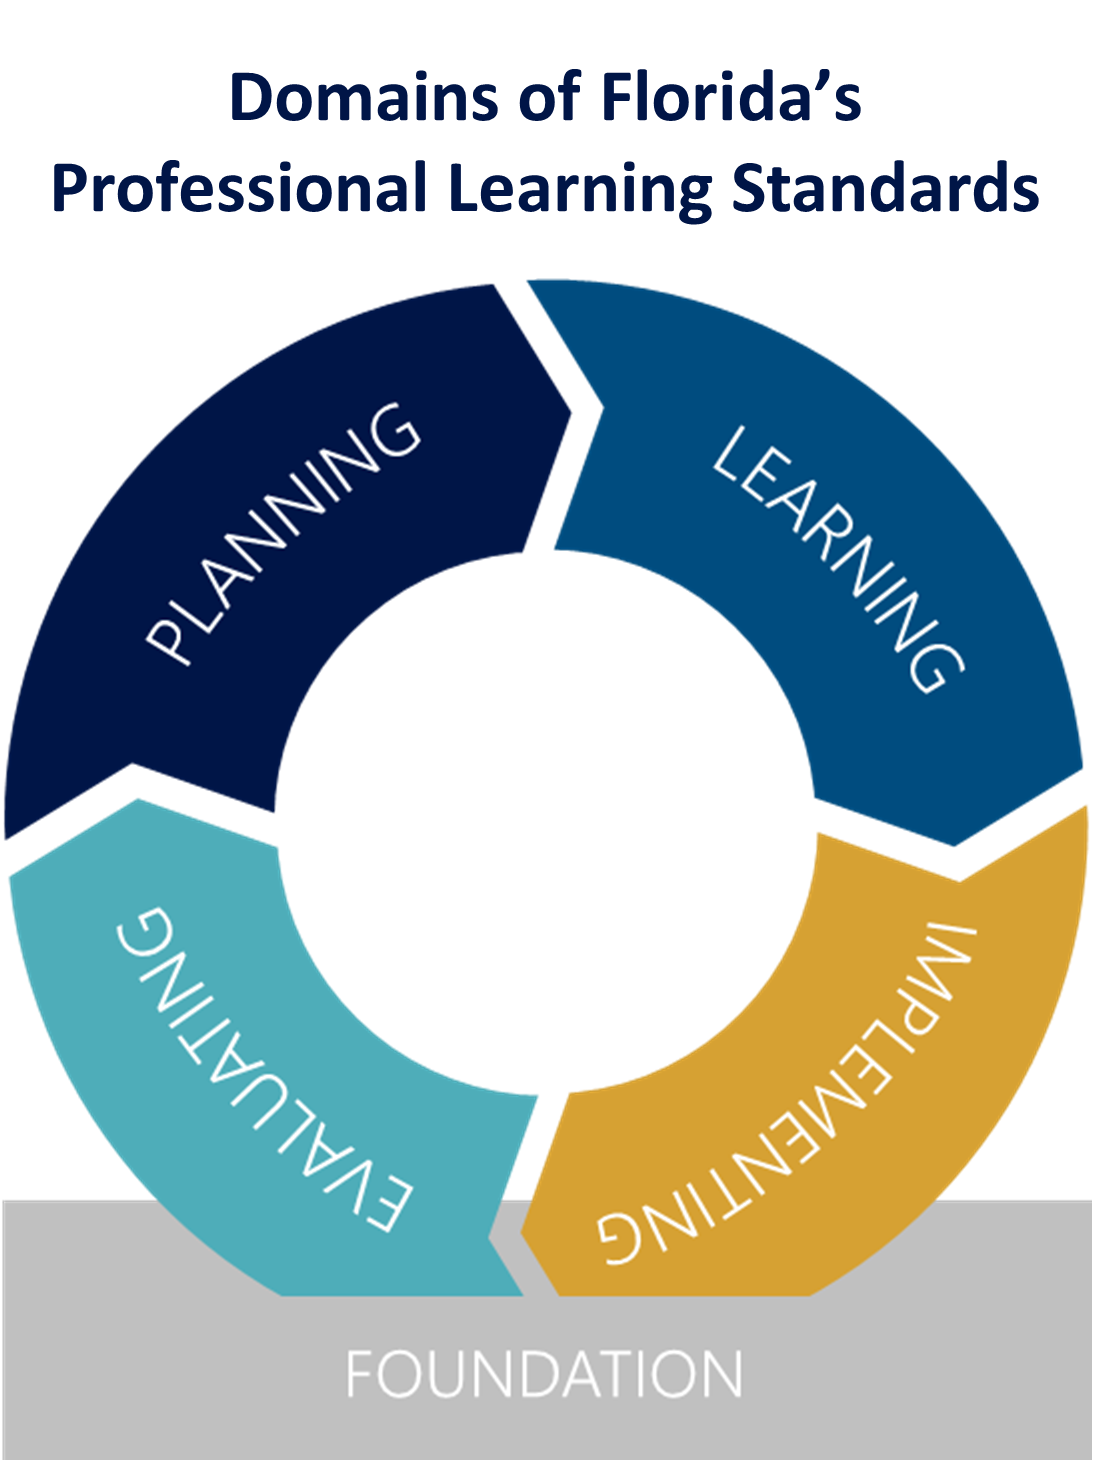 Domains of Florida’s Professional Learning Standards. There is a circle that is separated into four parts, with each part naming a different domain; planning, learning, implementing, and evaluating. The circle is sitting on top of a box with the word Foundation in it.